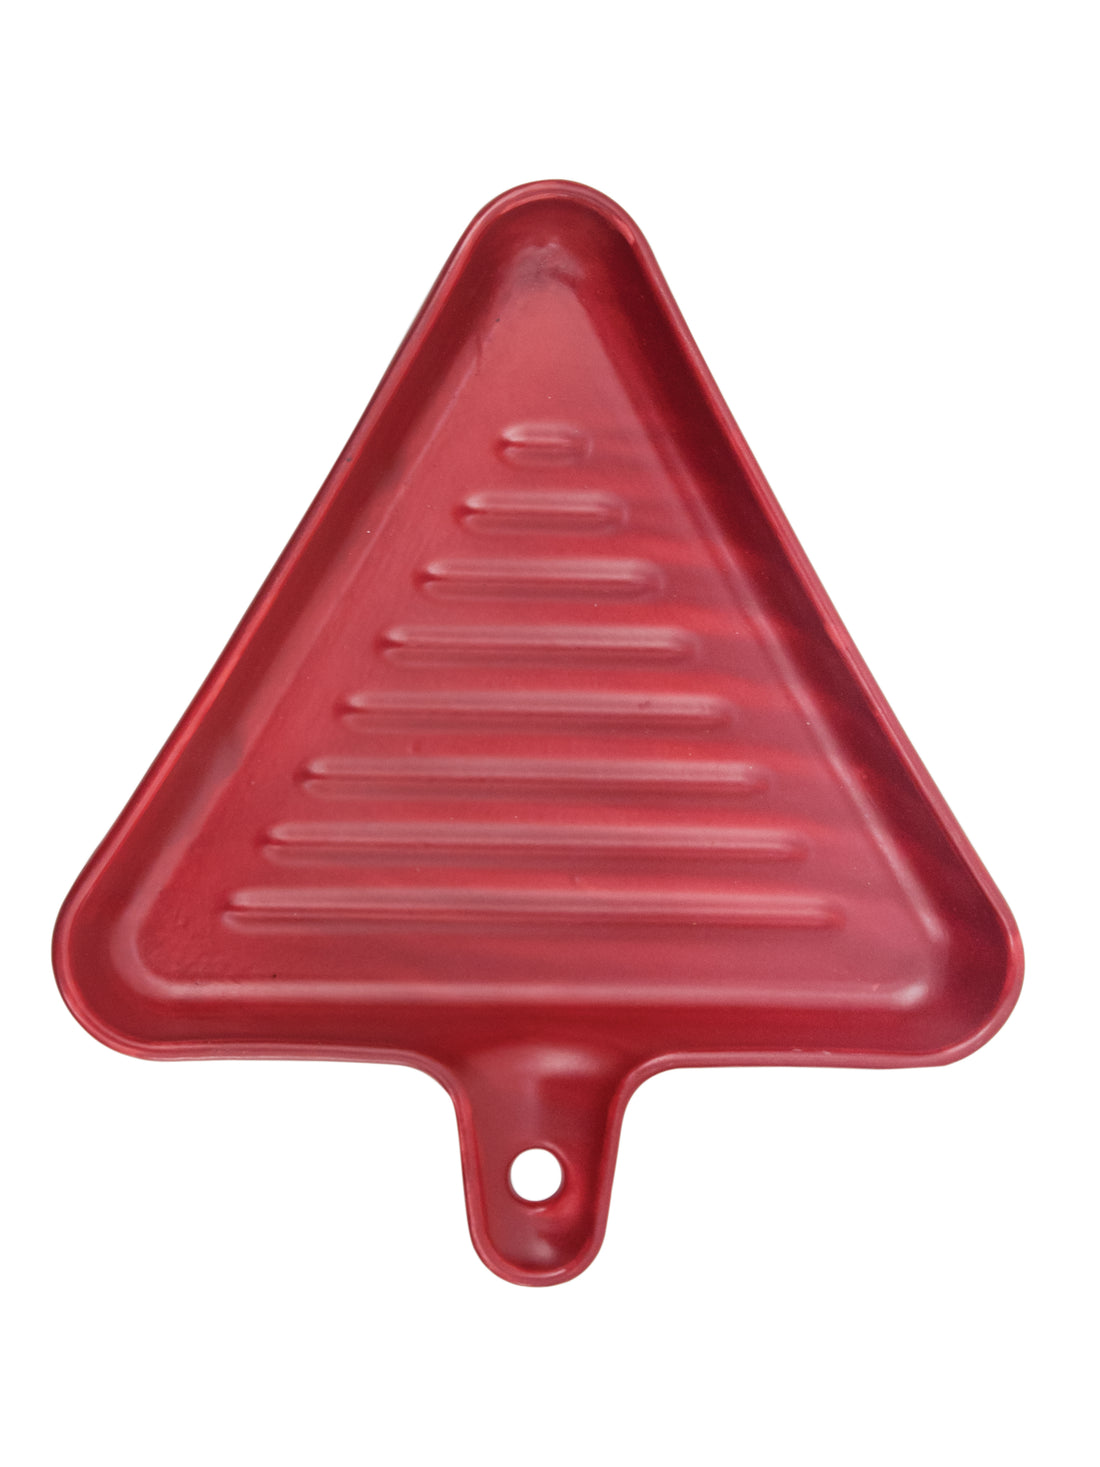 Ceramic Triangle Grill Plates for Serving, Red Color